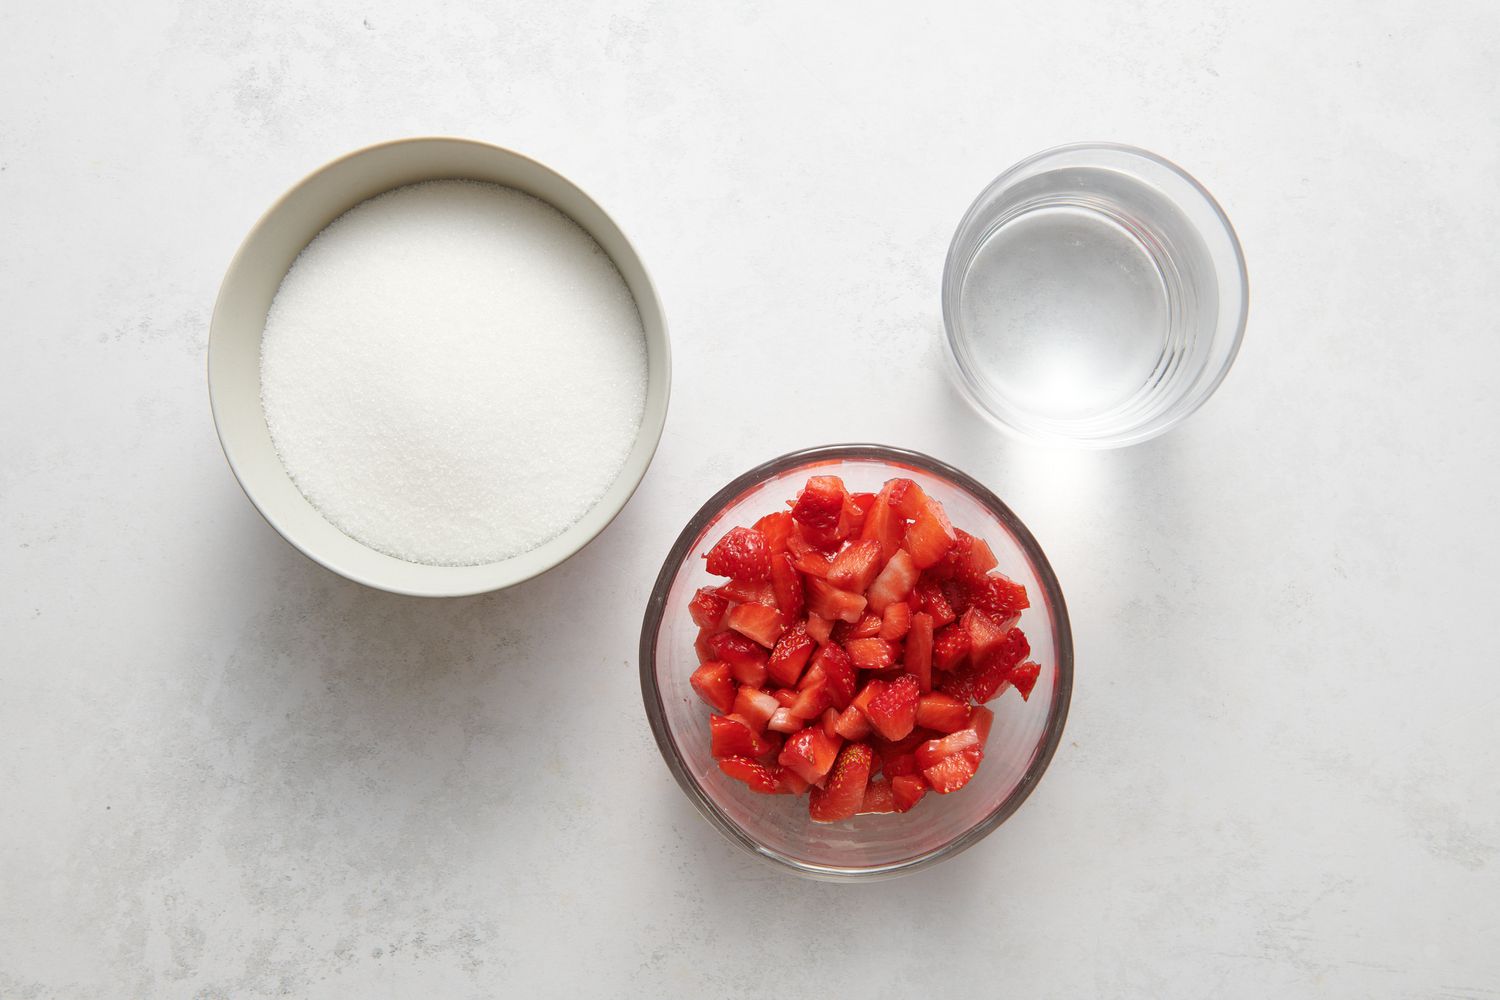 Ingredients to make strawberry simple syrup